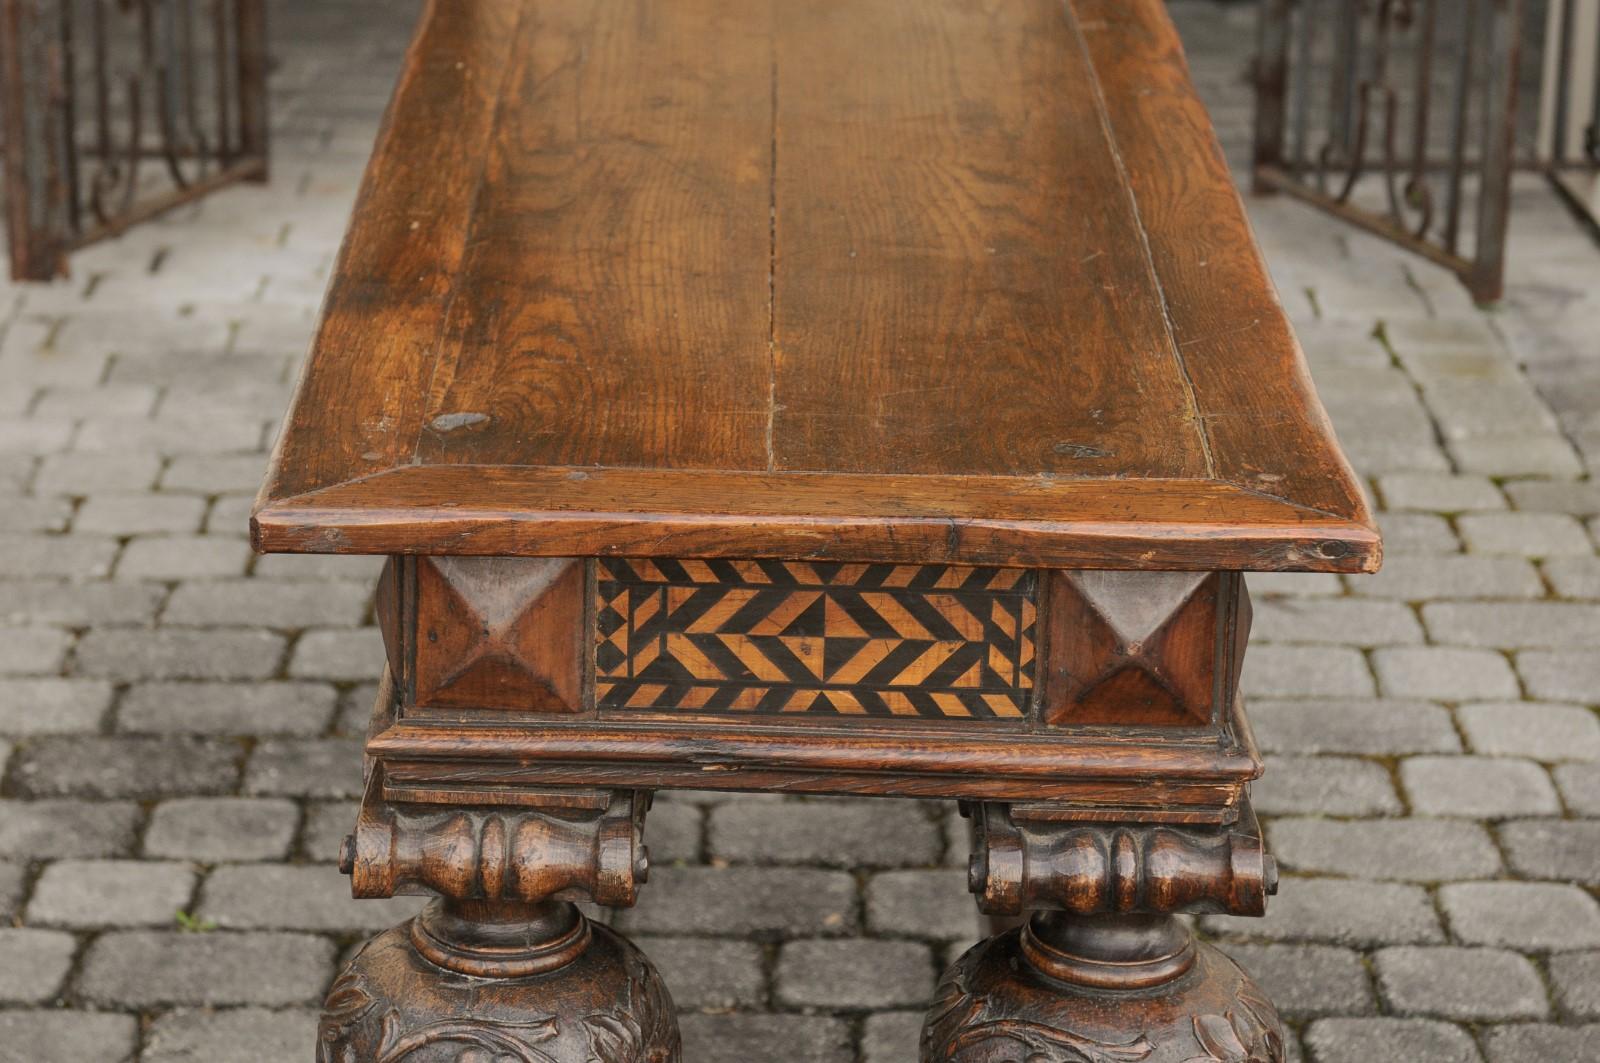 19th Century English 1880s Oak Serving Table with Black Geometrical Décor and Carved Legs